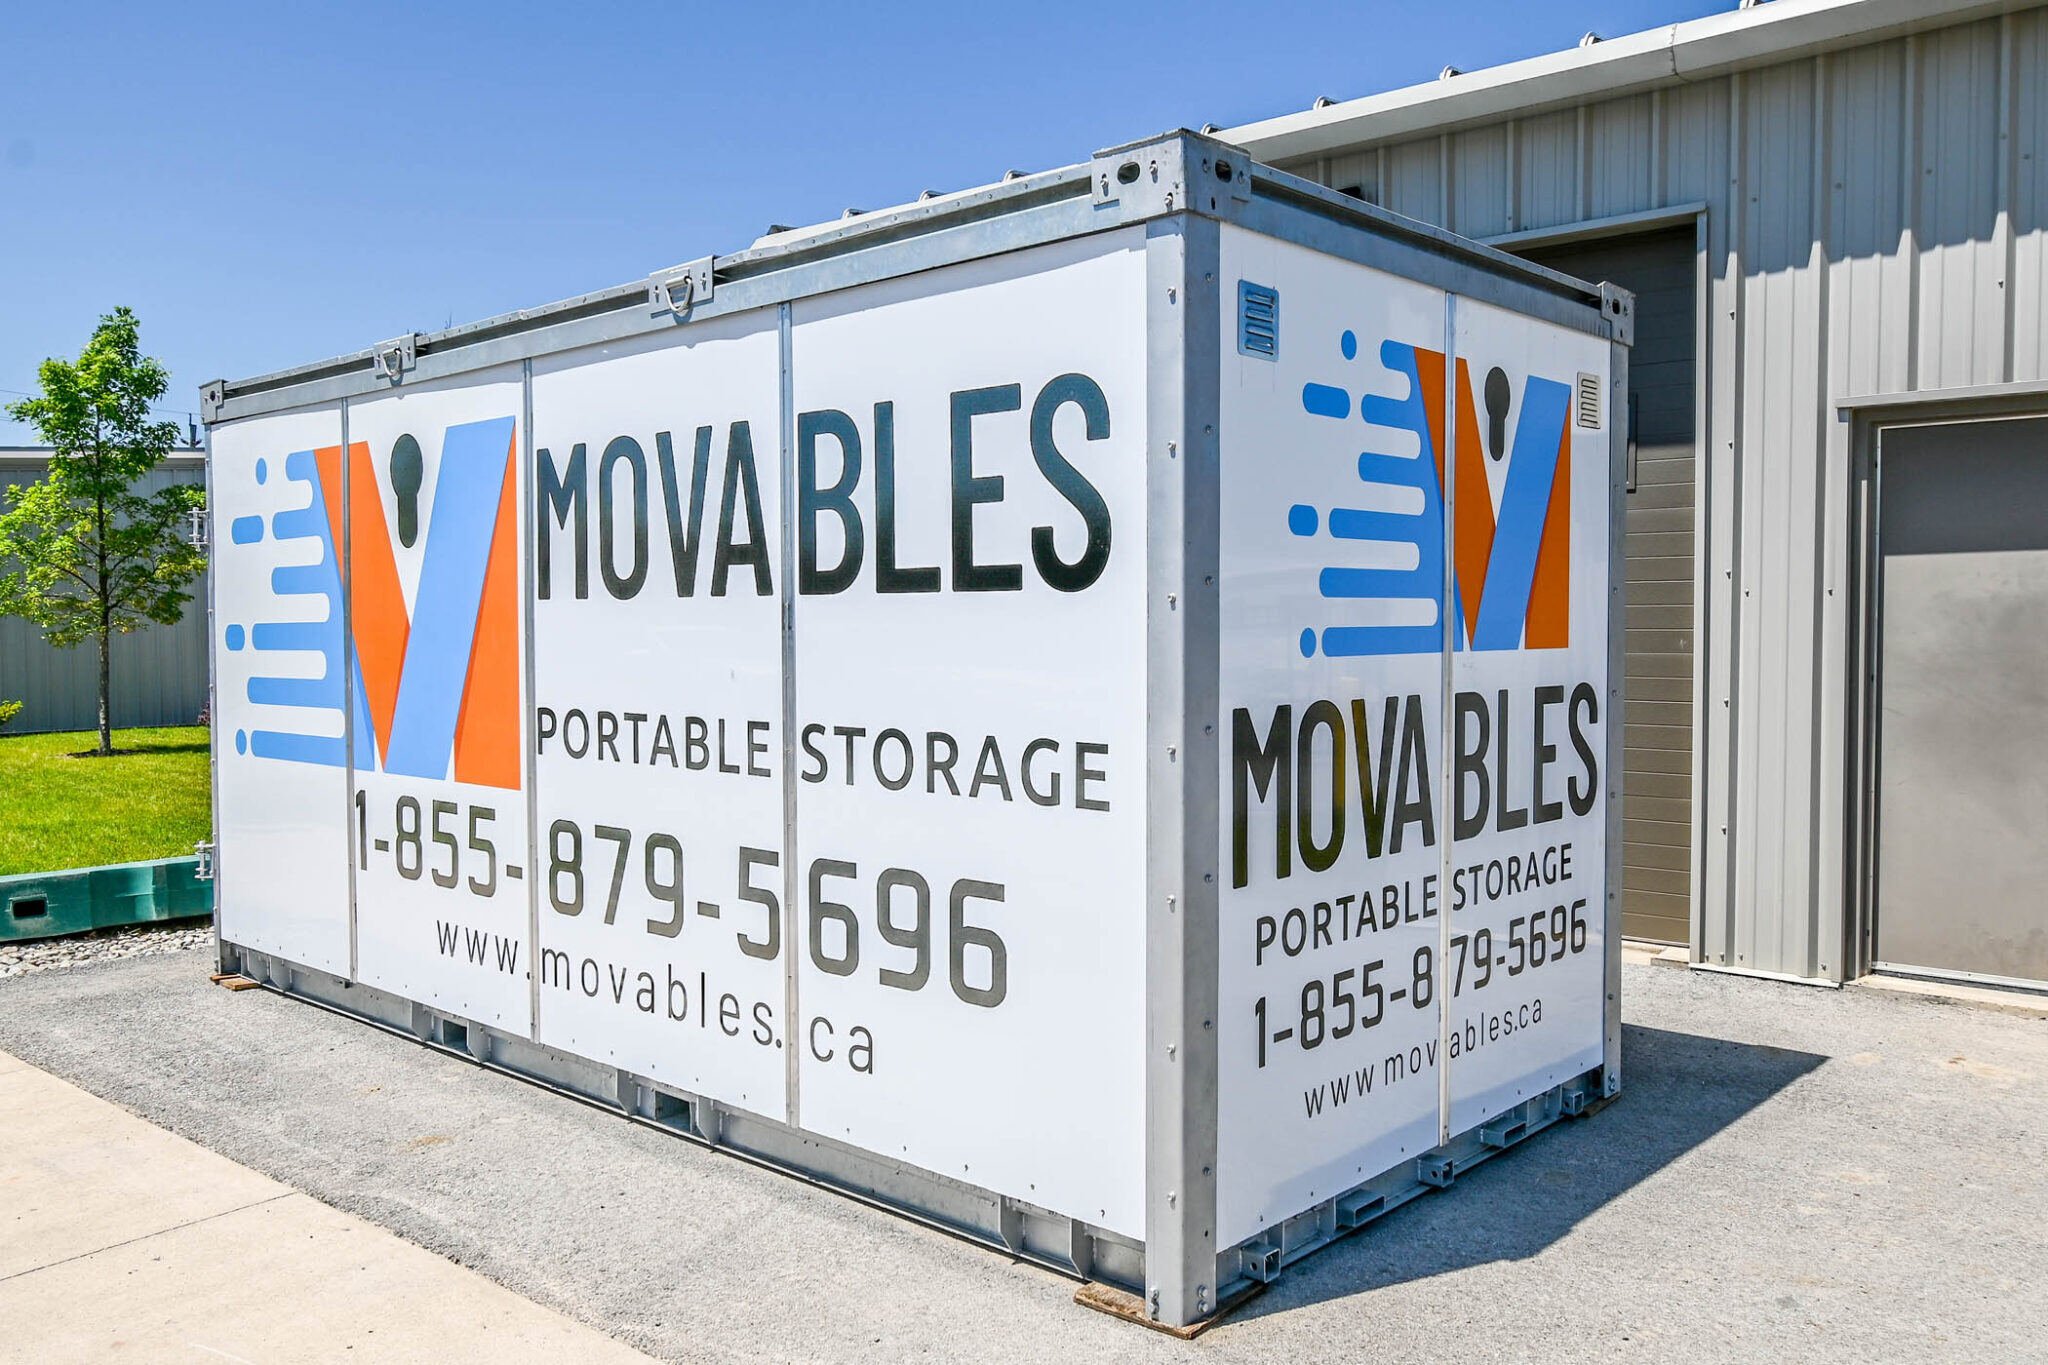 Movables Portable Storage